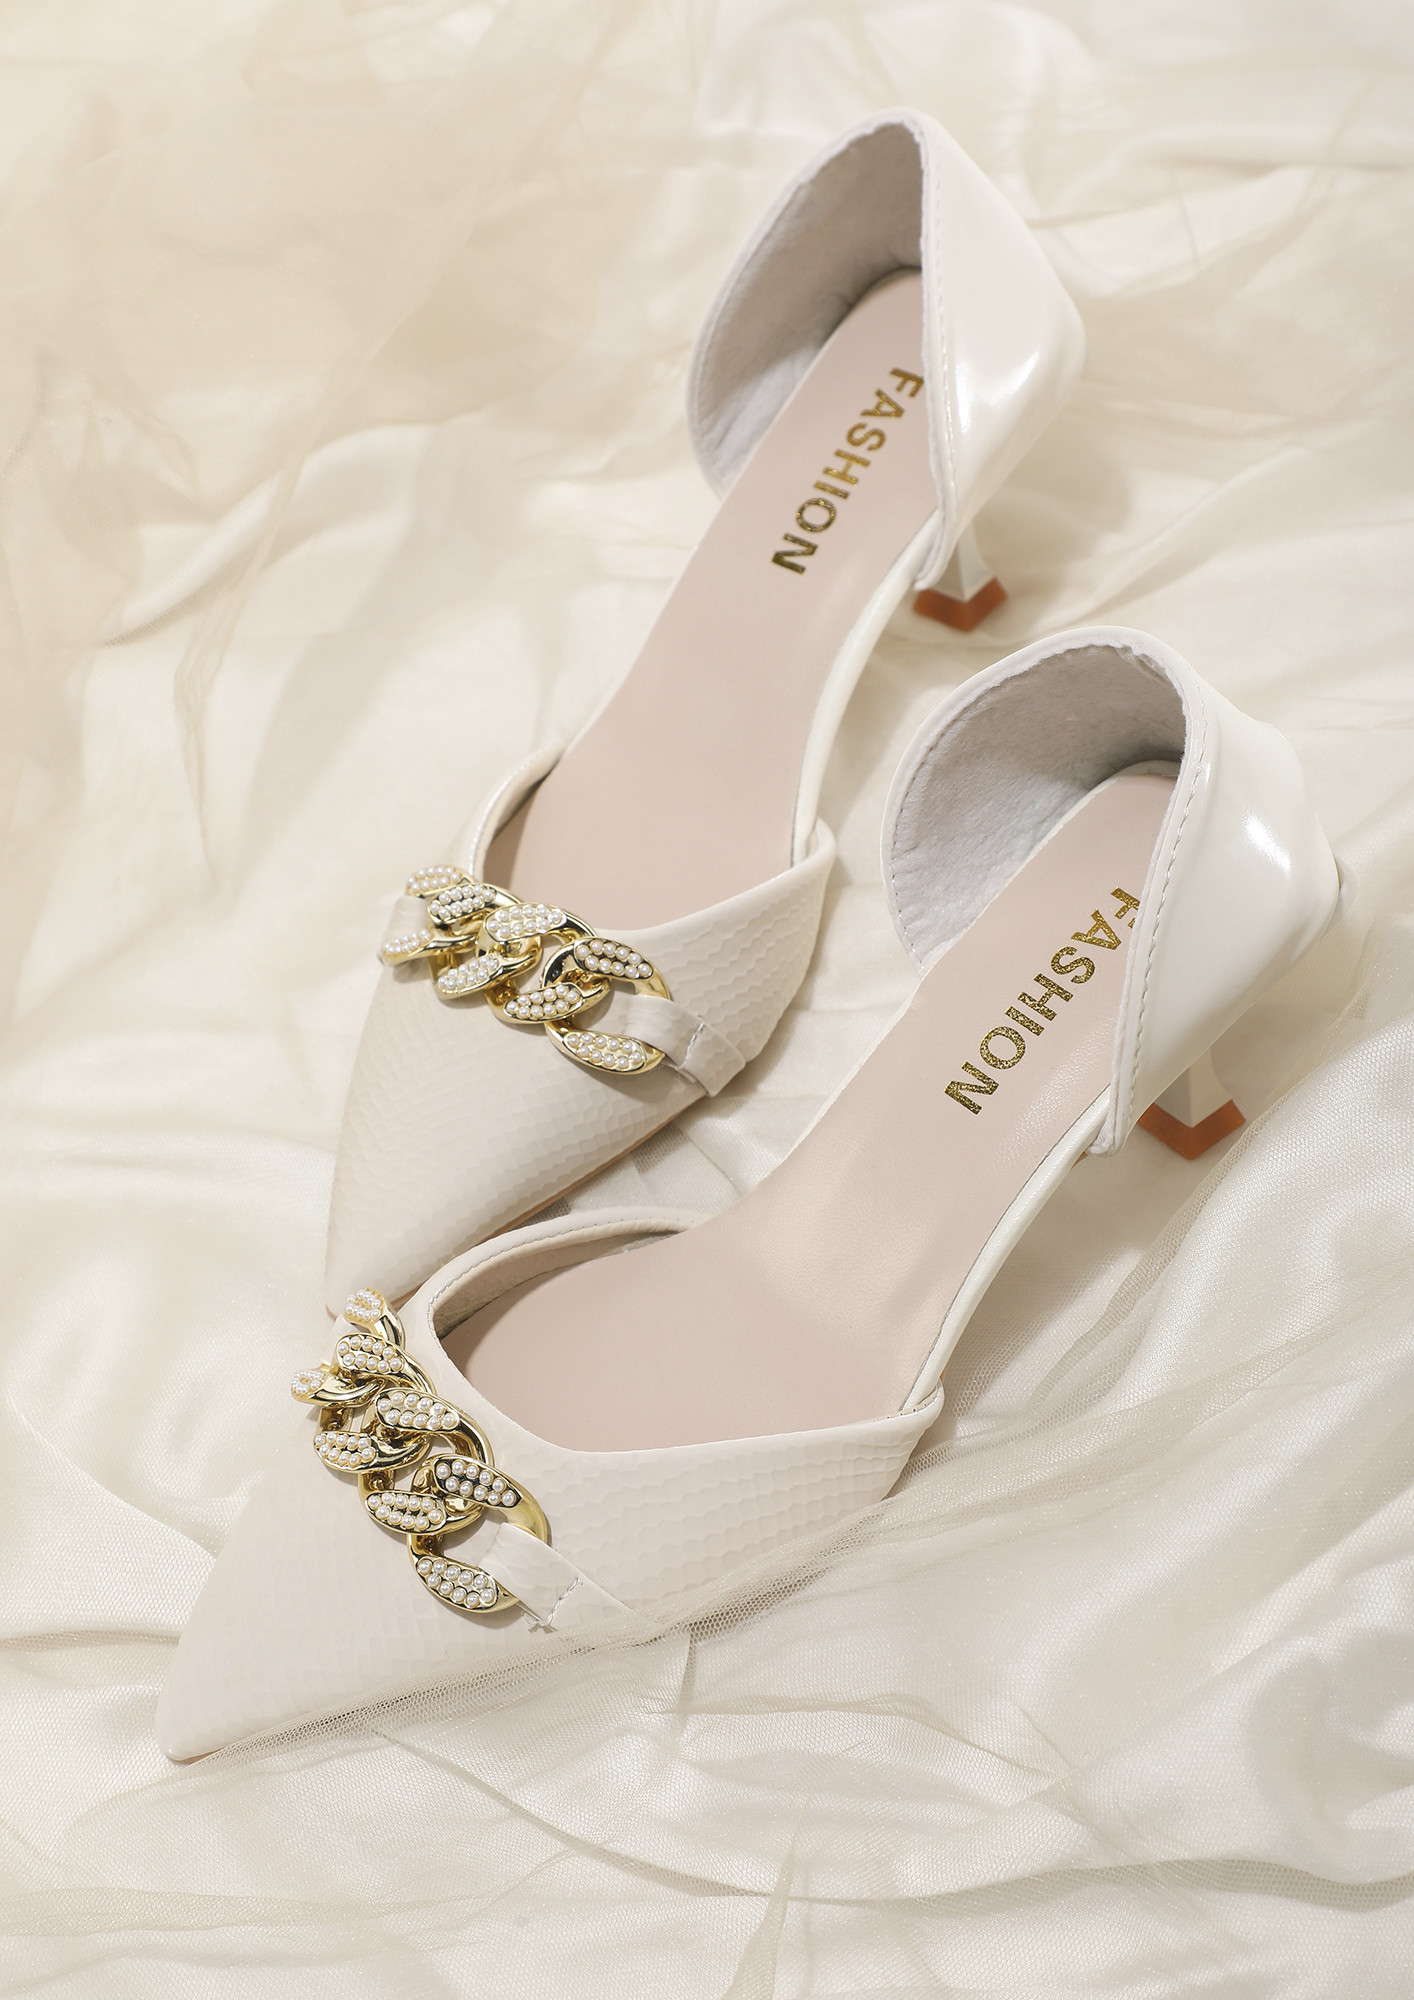 CLICKING THE CHICNESS BEIGE HEELS